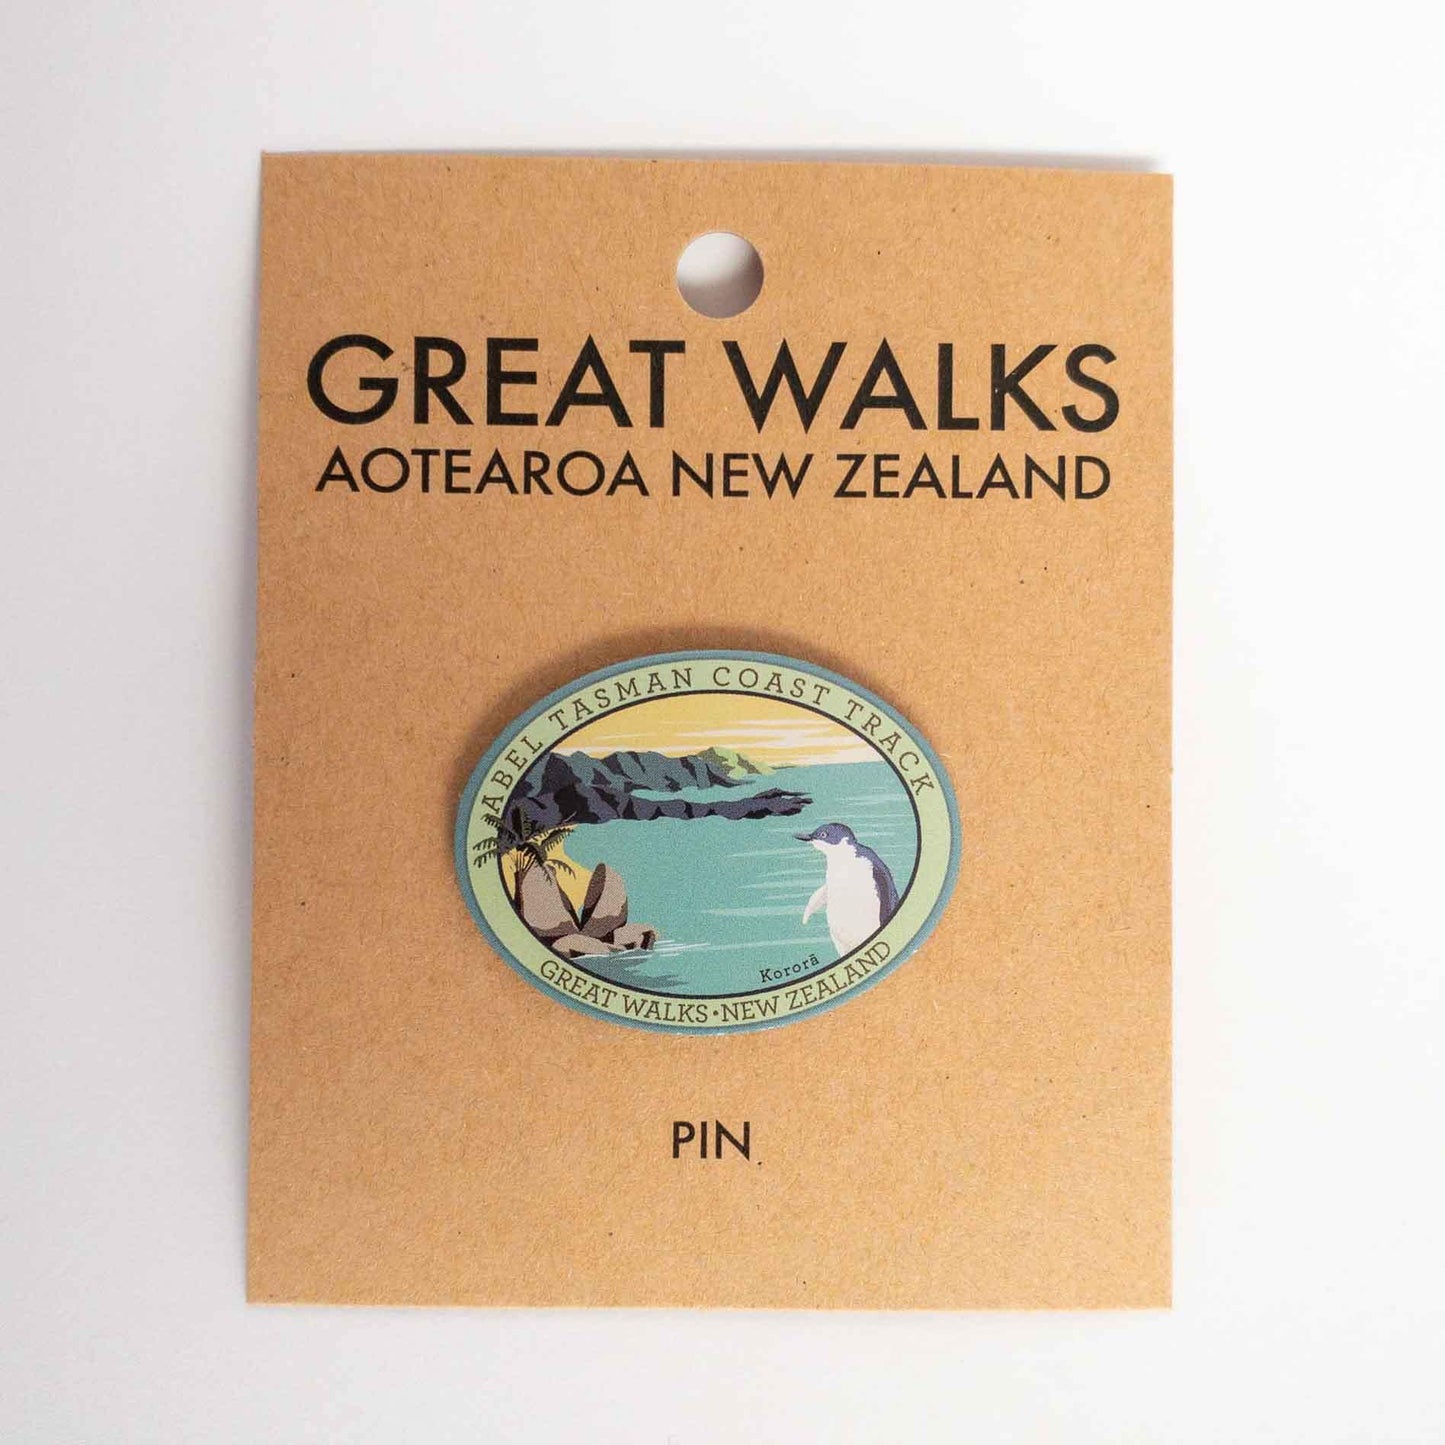 Oval Abel Tasman Coast Track patch, with a little penguin, split apple rock, yellow sky and sandy bays, on brown kraft backing card.